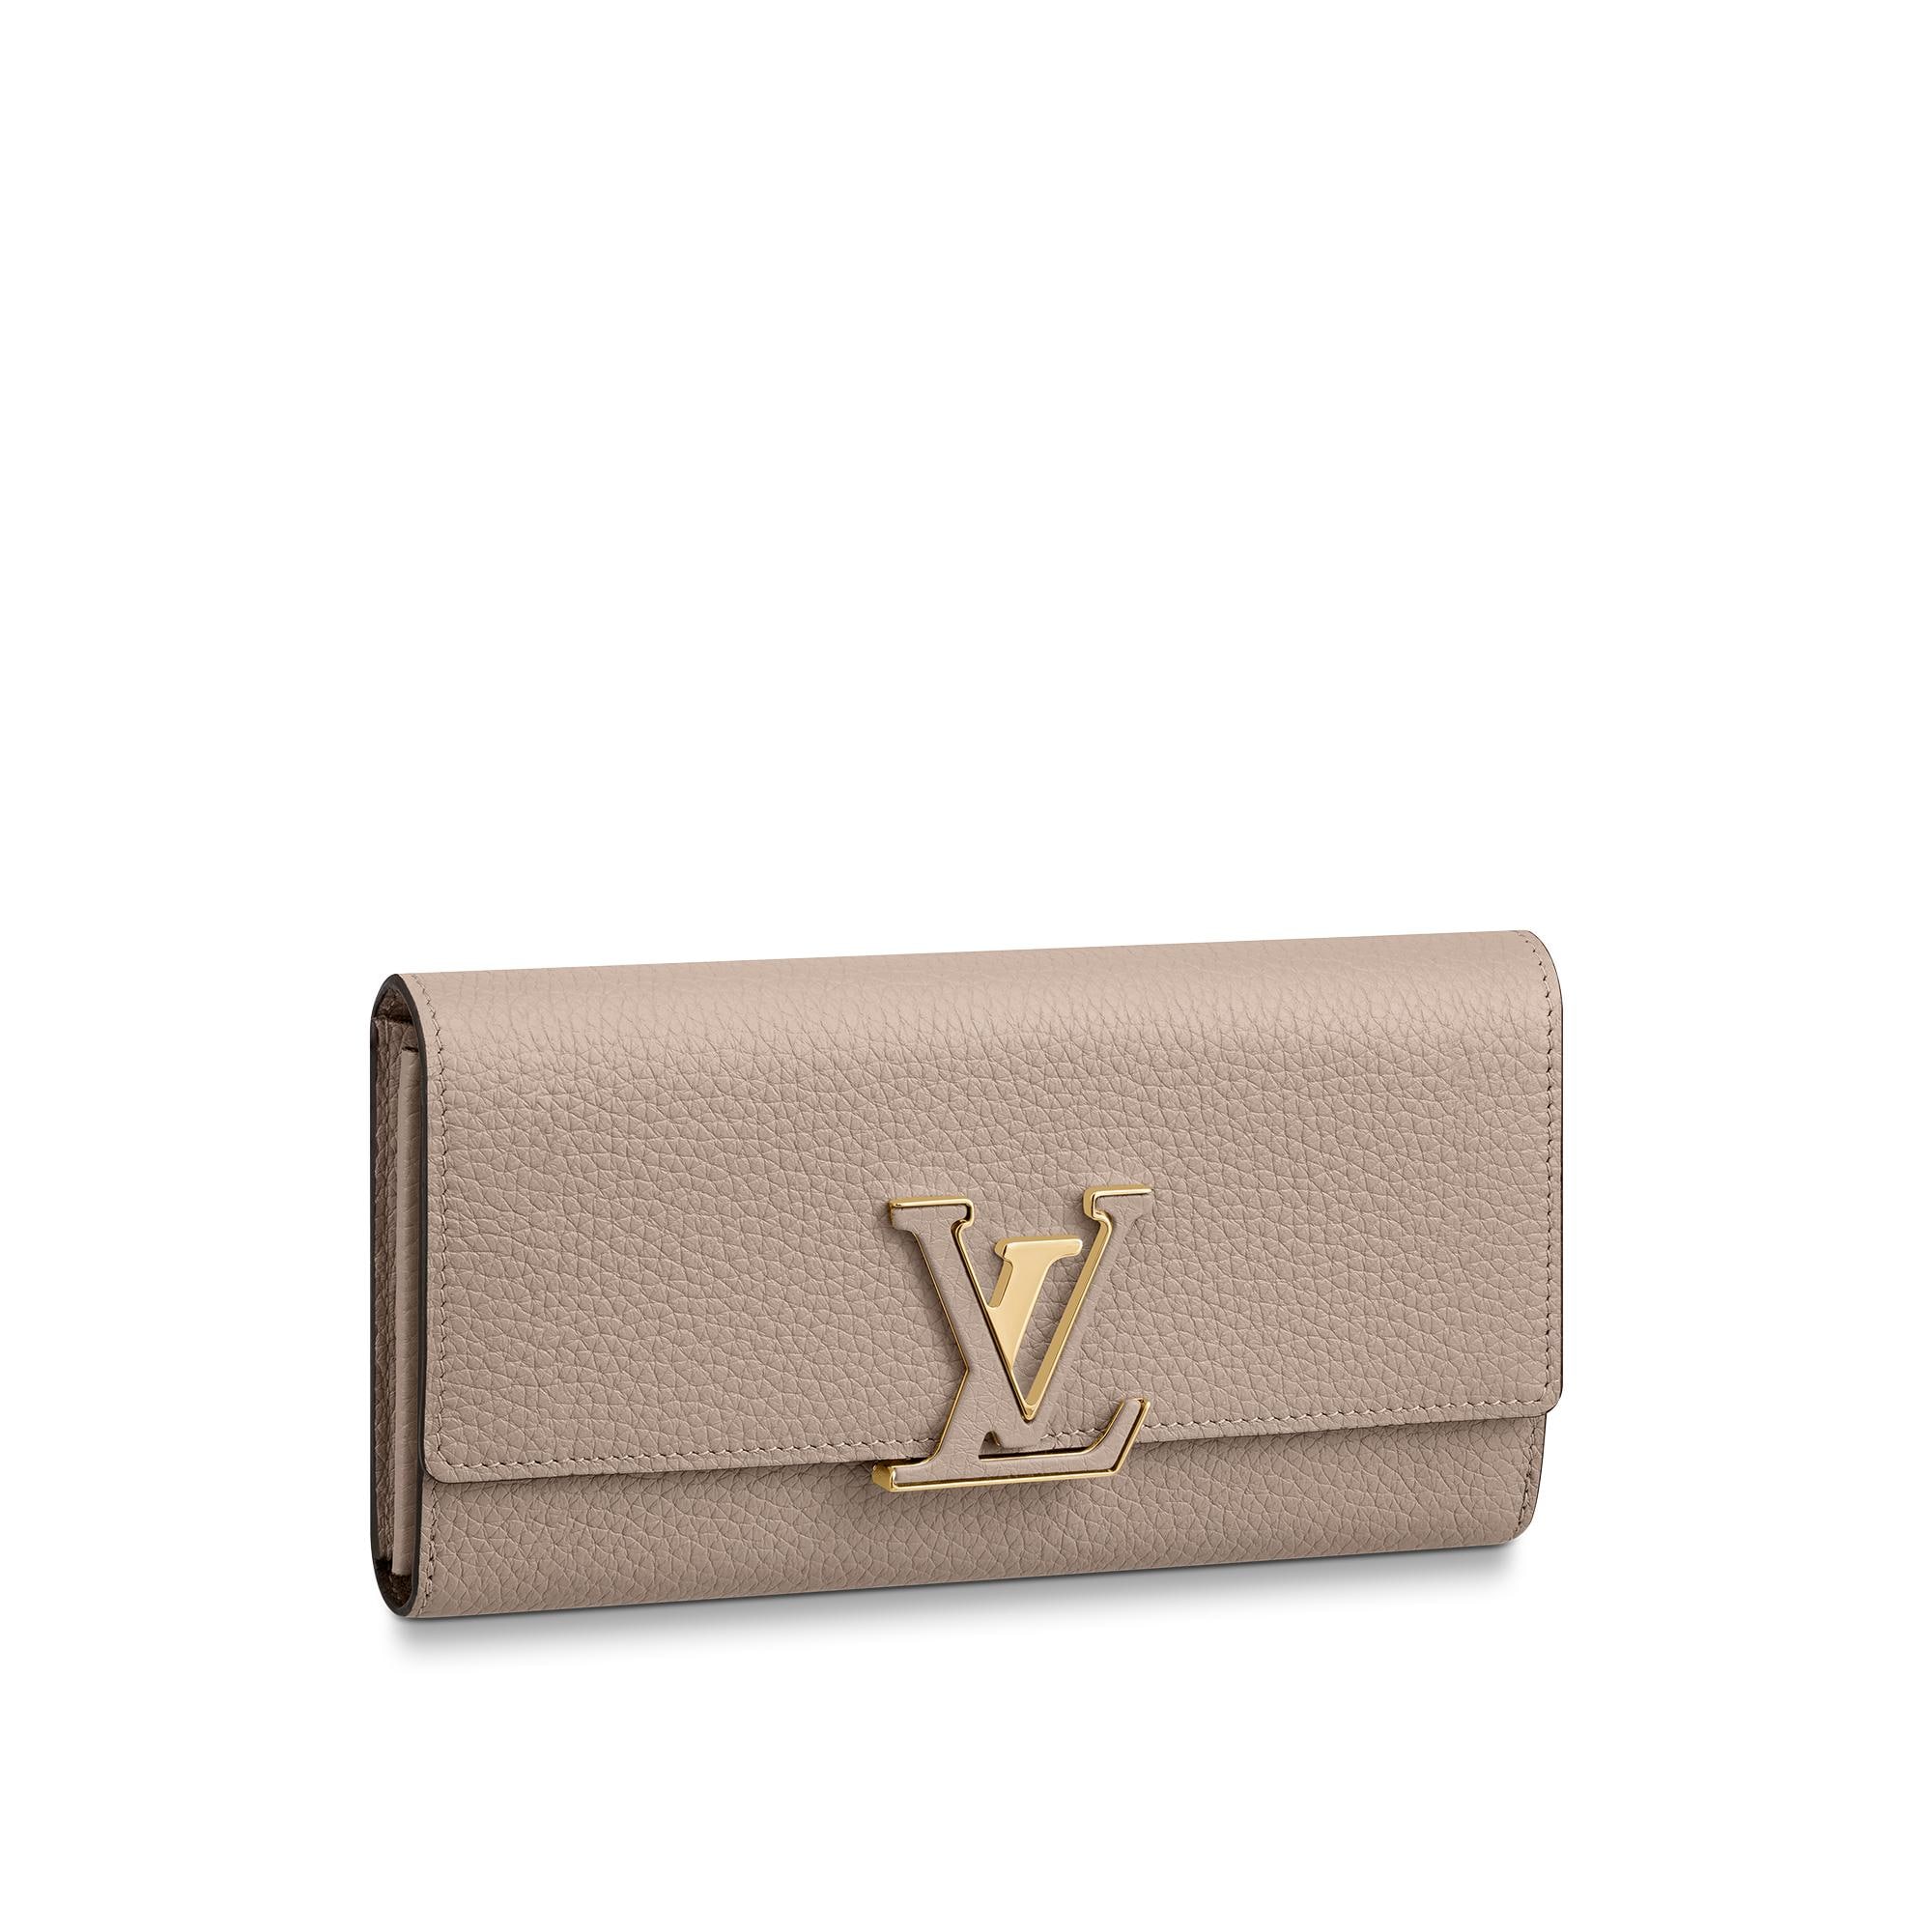 Louis Vuitton Capucines Wallet Taurillon Leather in Beige – WOMEN – Small Leather Goods M61249